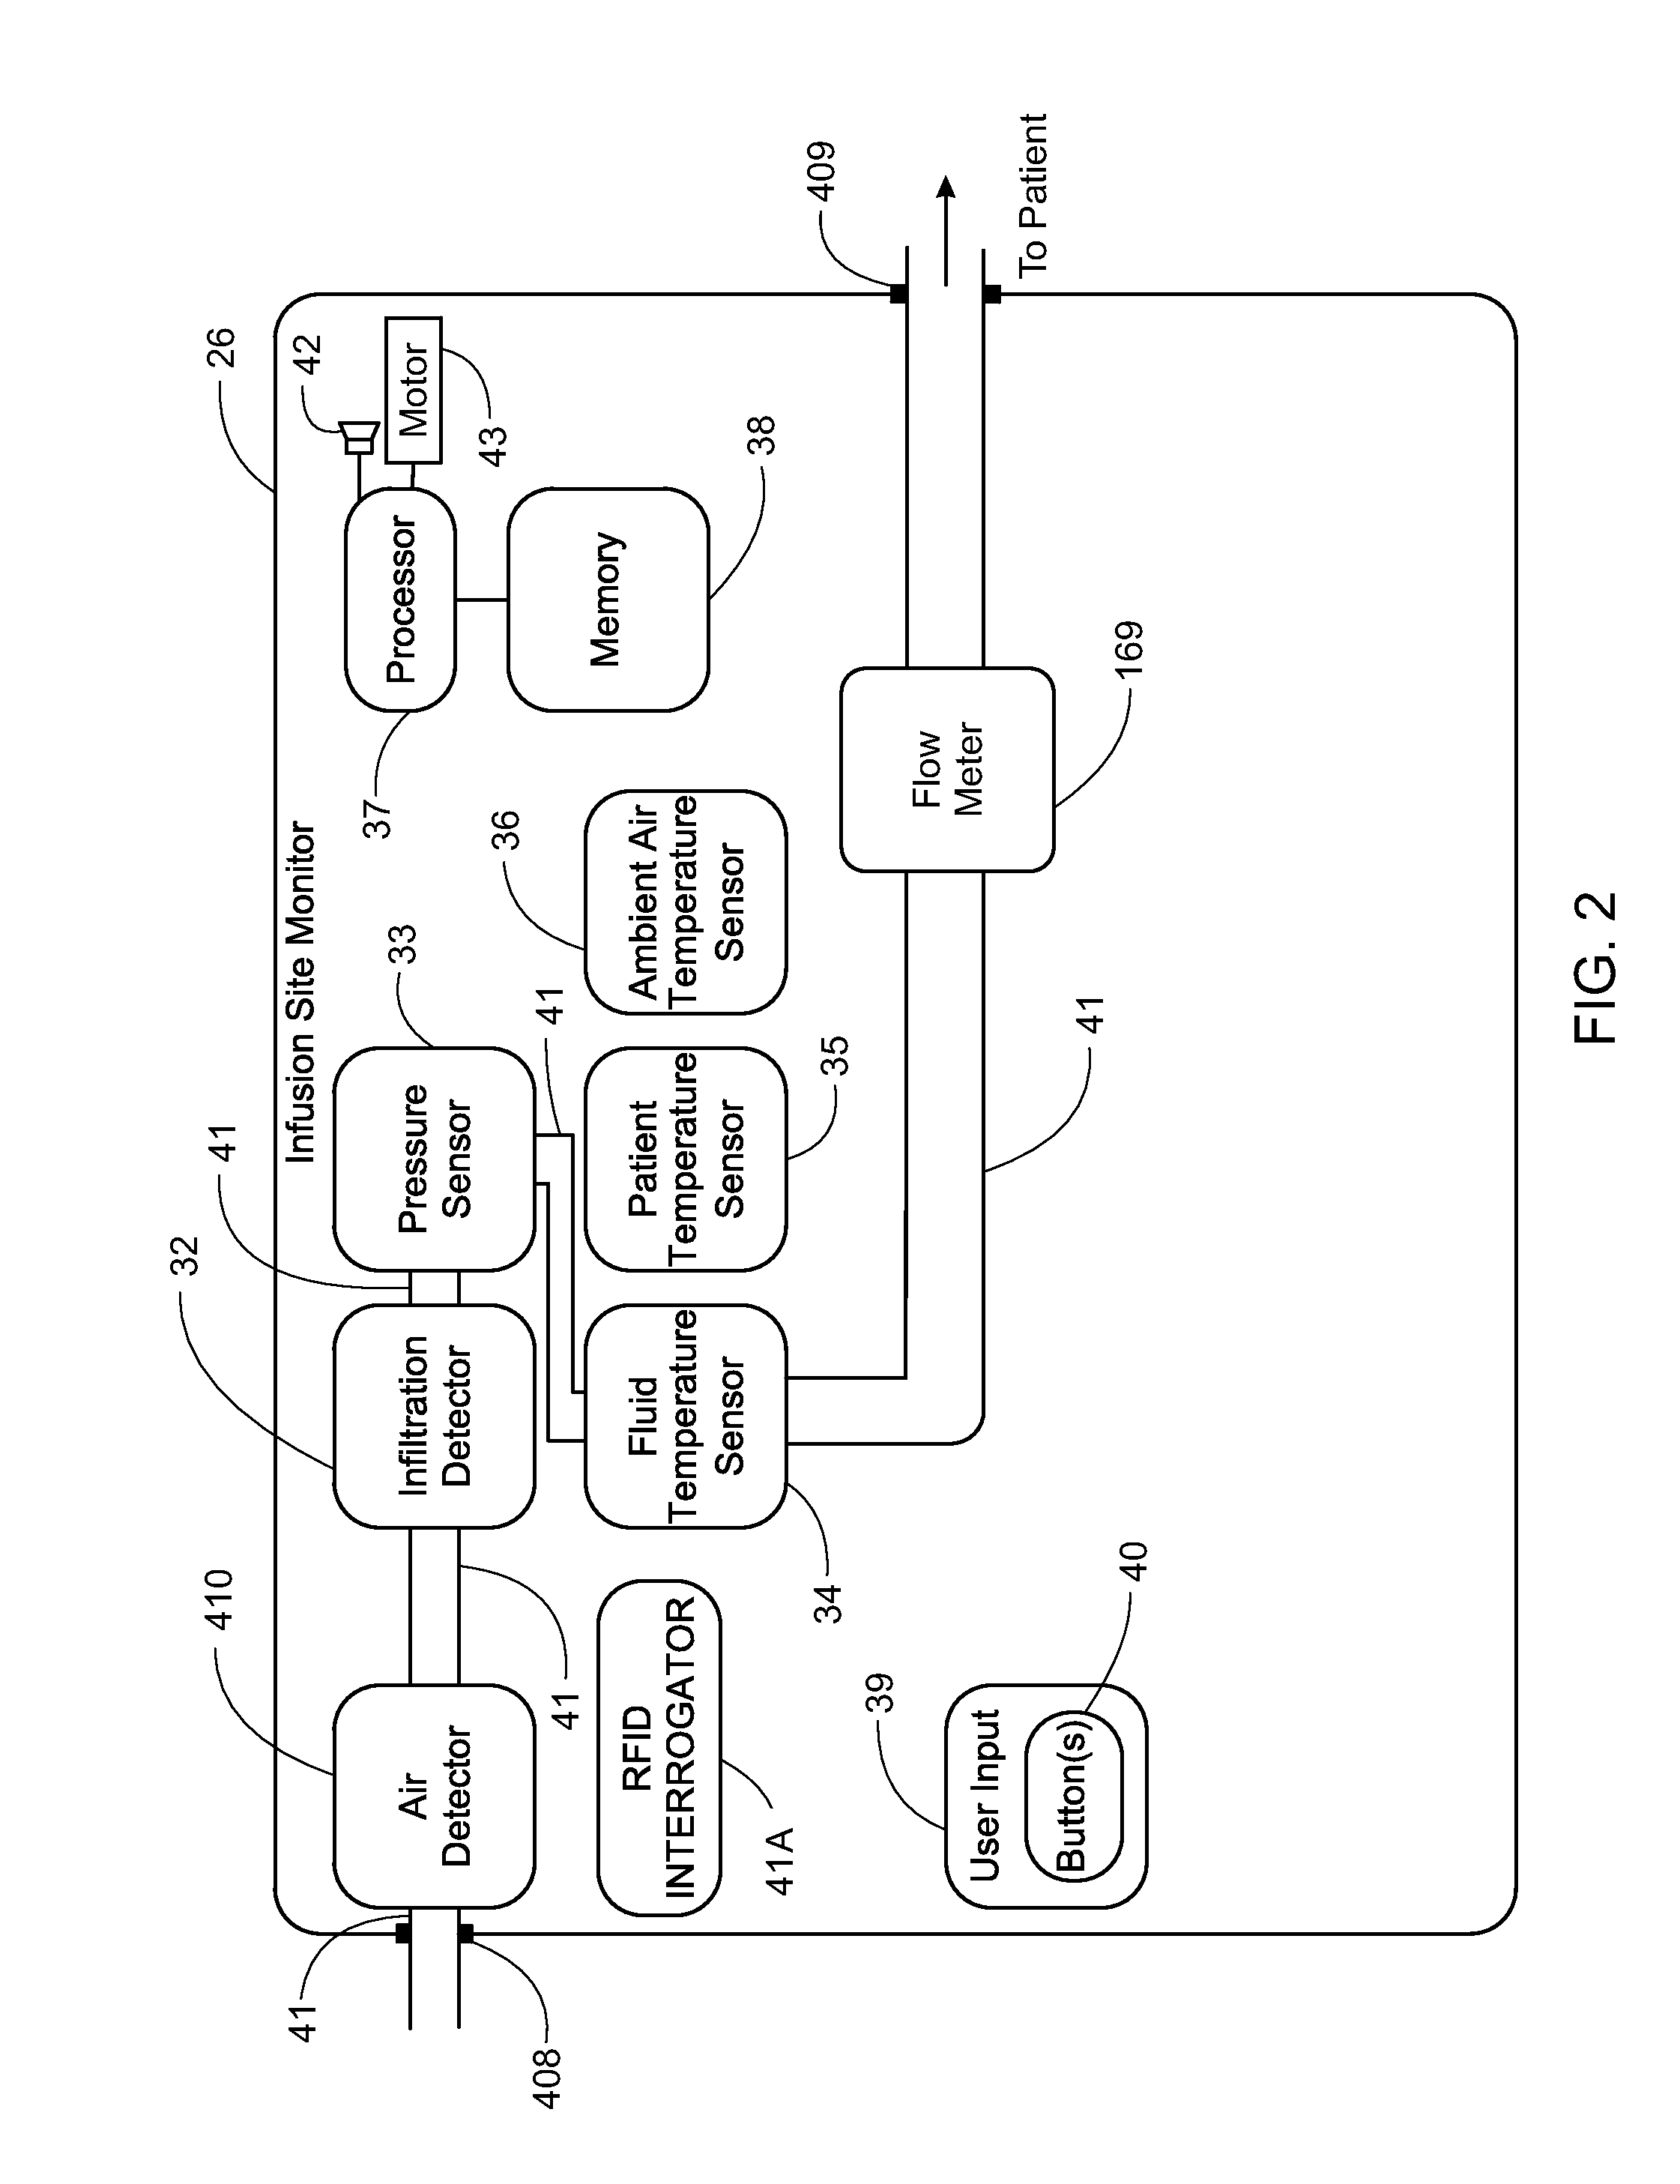 System, Method, and Apparatus for Infusing Fluid